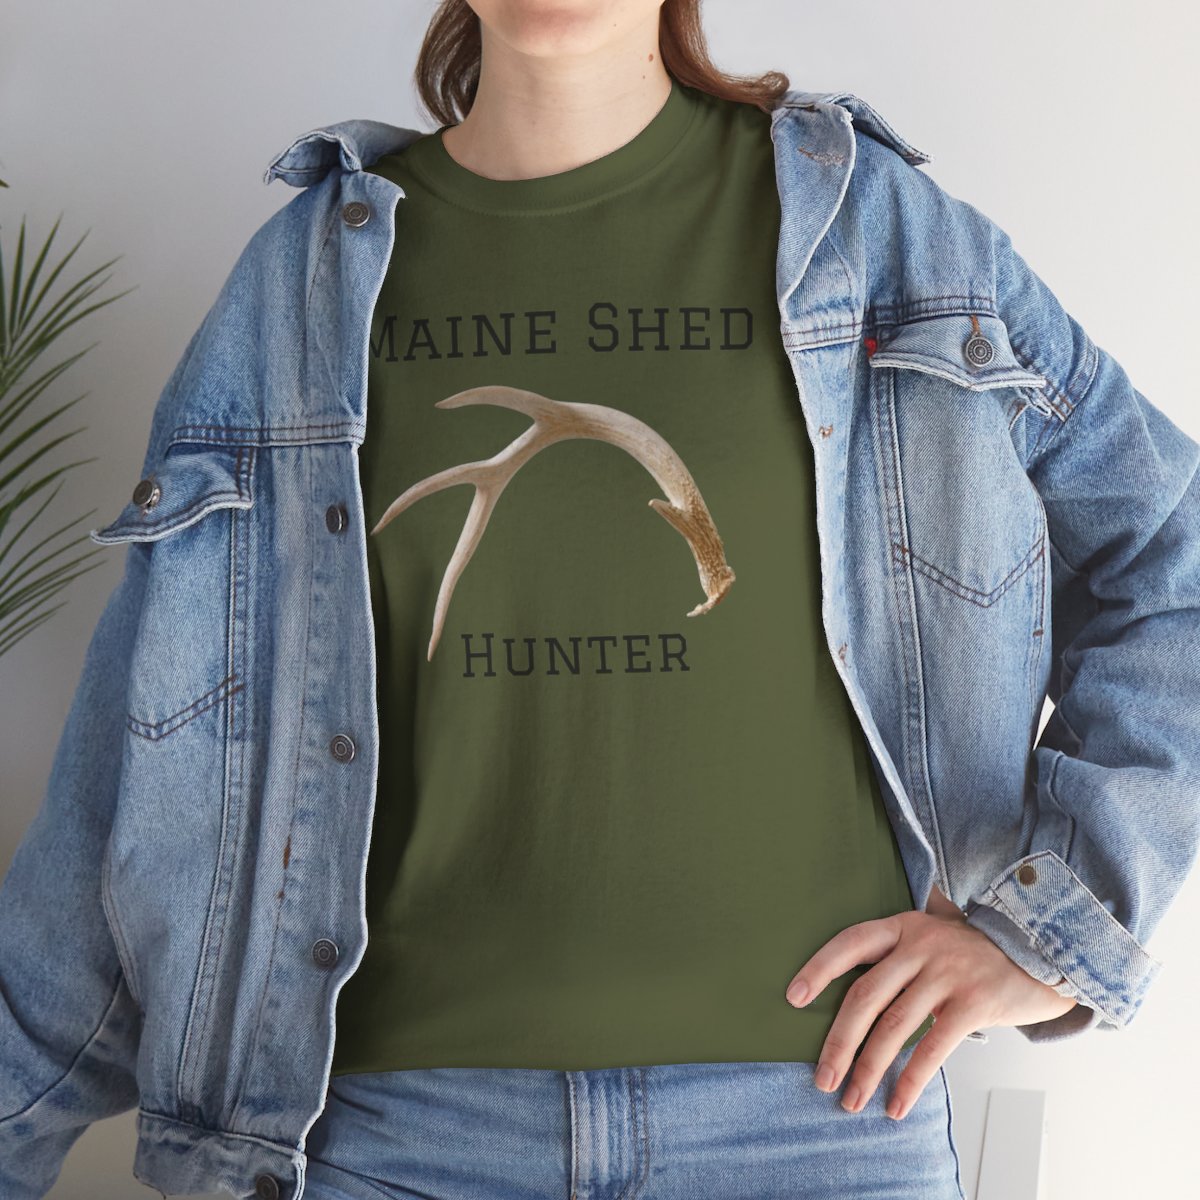 Maine Shed Hunter (Deer) Unisex Heavy Cotton Tee product thumbnail image